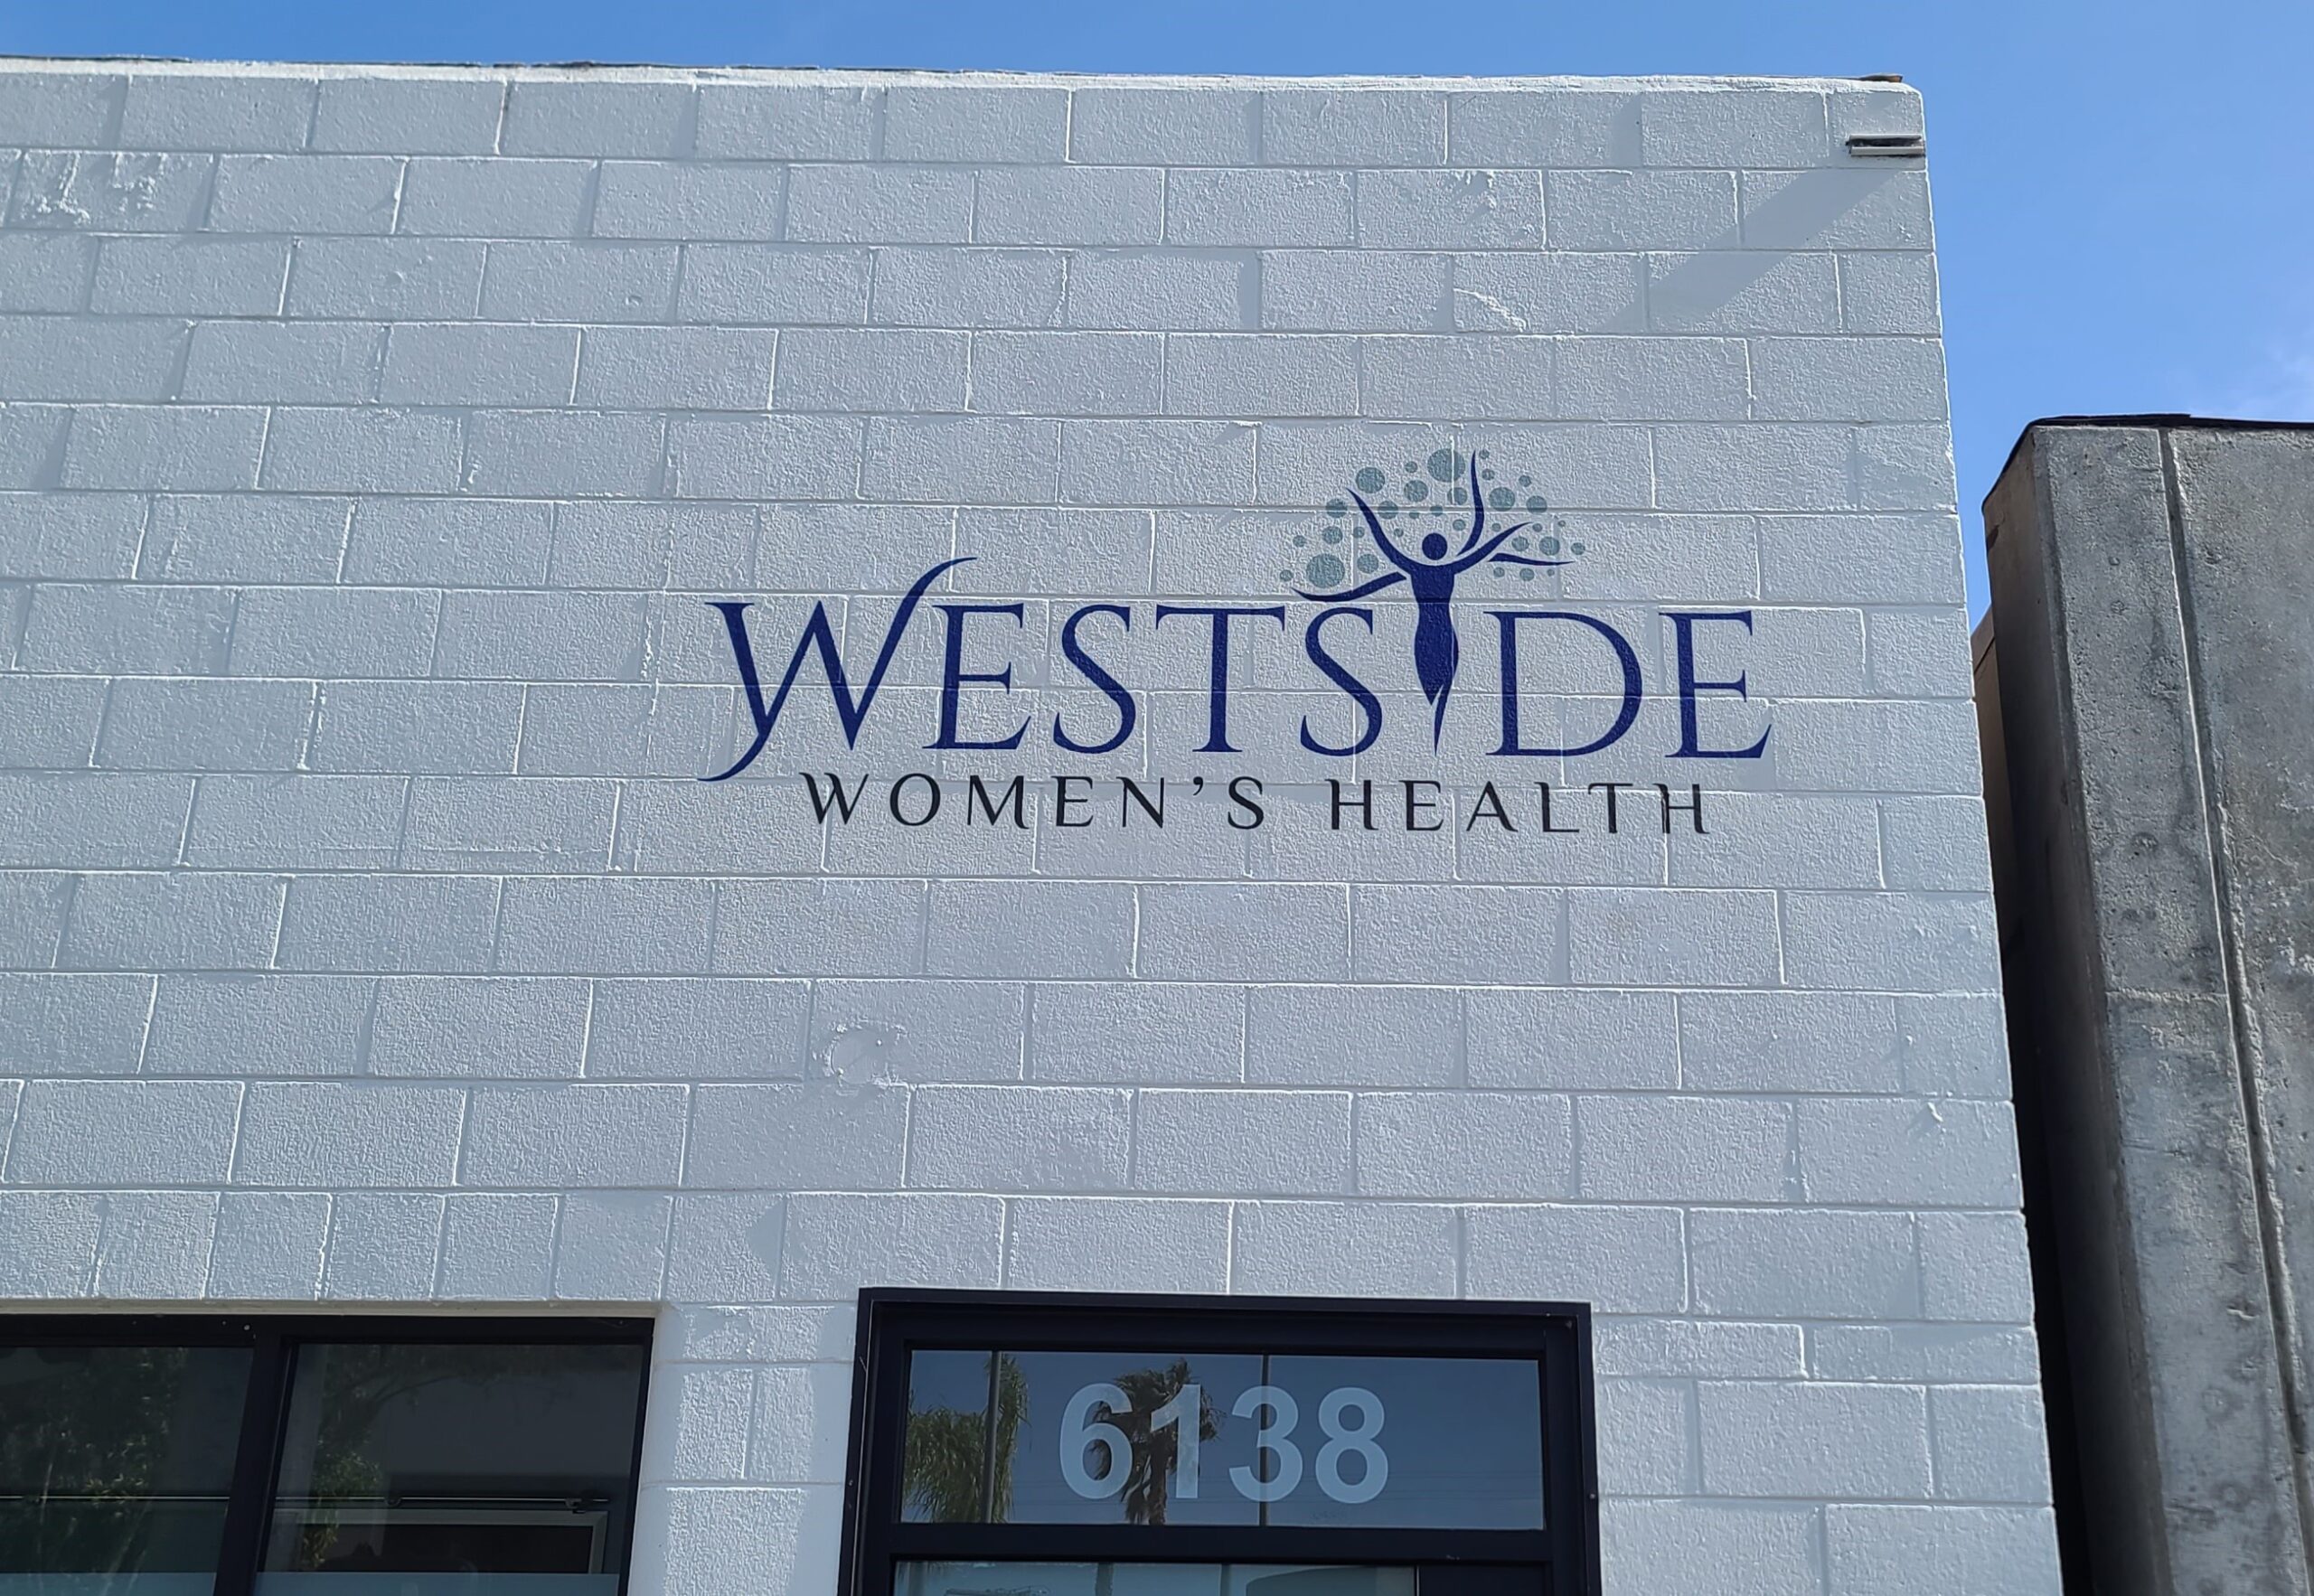 Hand painted signs are timeless, each one is a unique work of art. Like this hand painted sign for Westside Women's Health in Culver City.